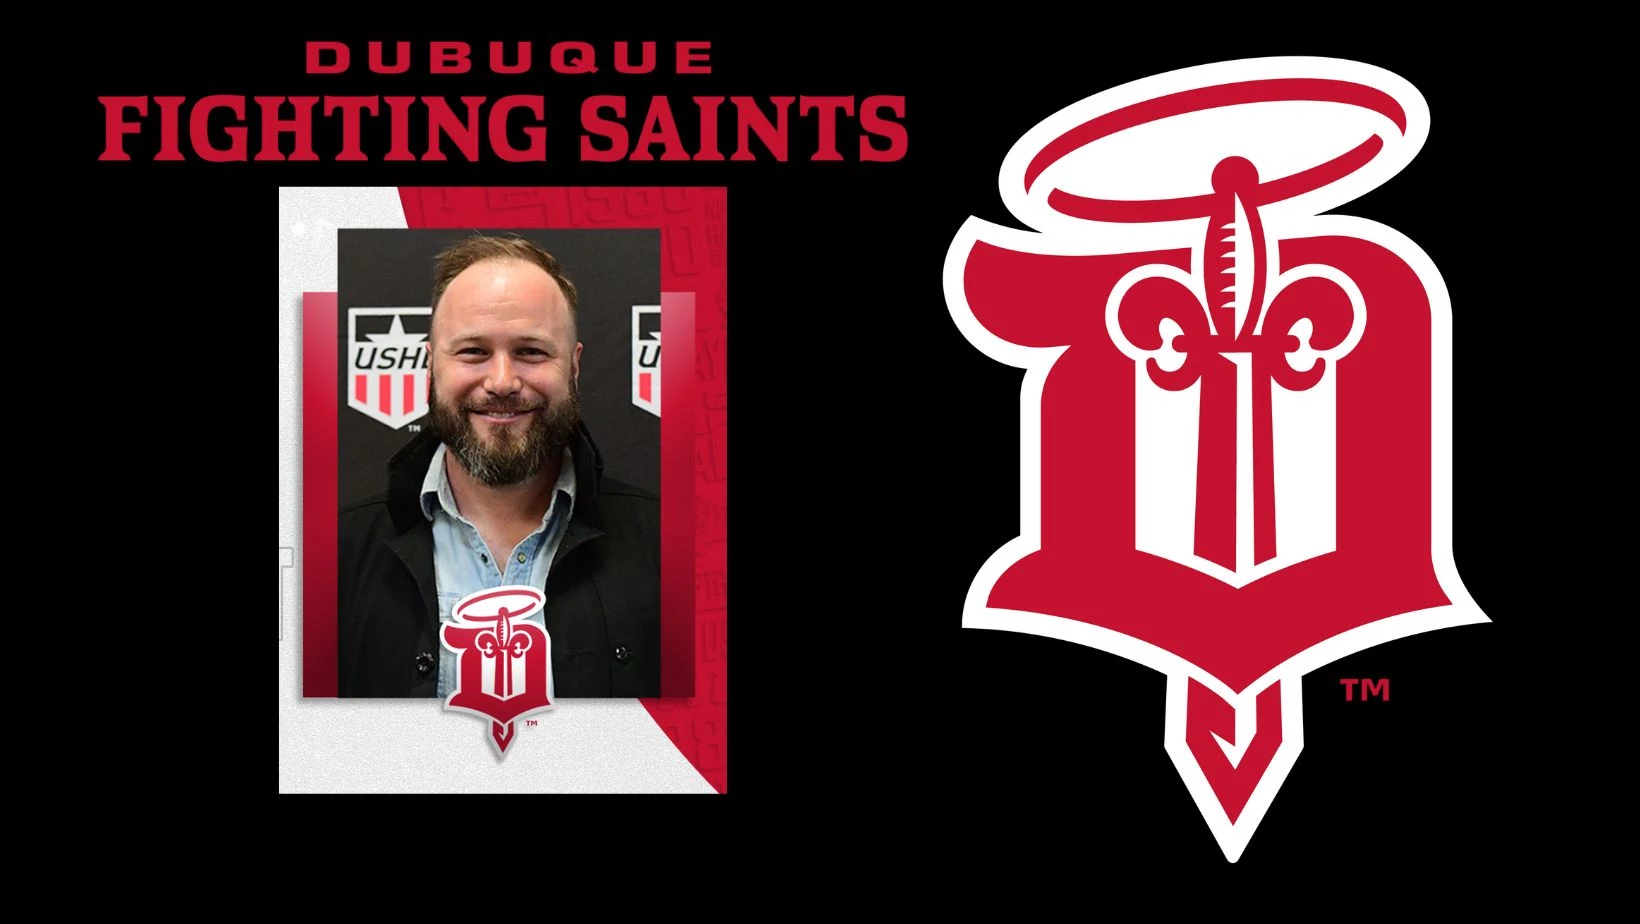 Dubuque Fighting Saints GM Larsson Extends Stay pic